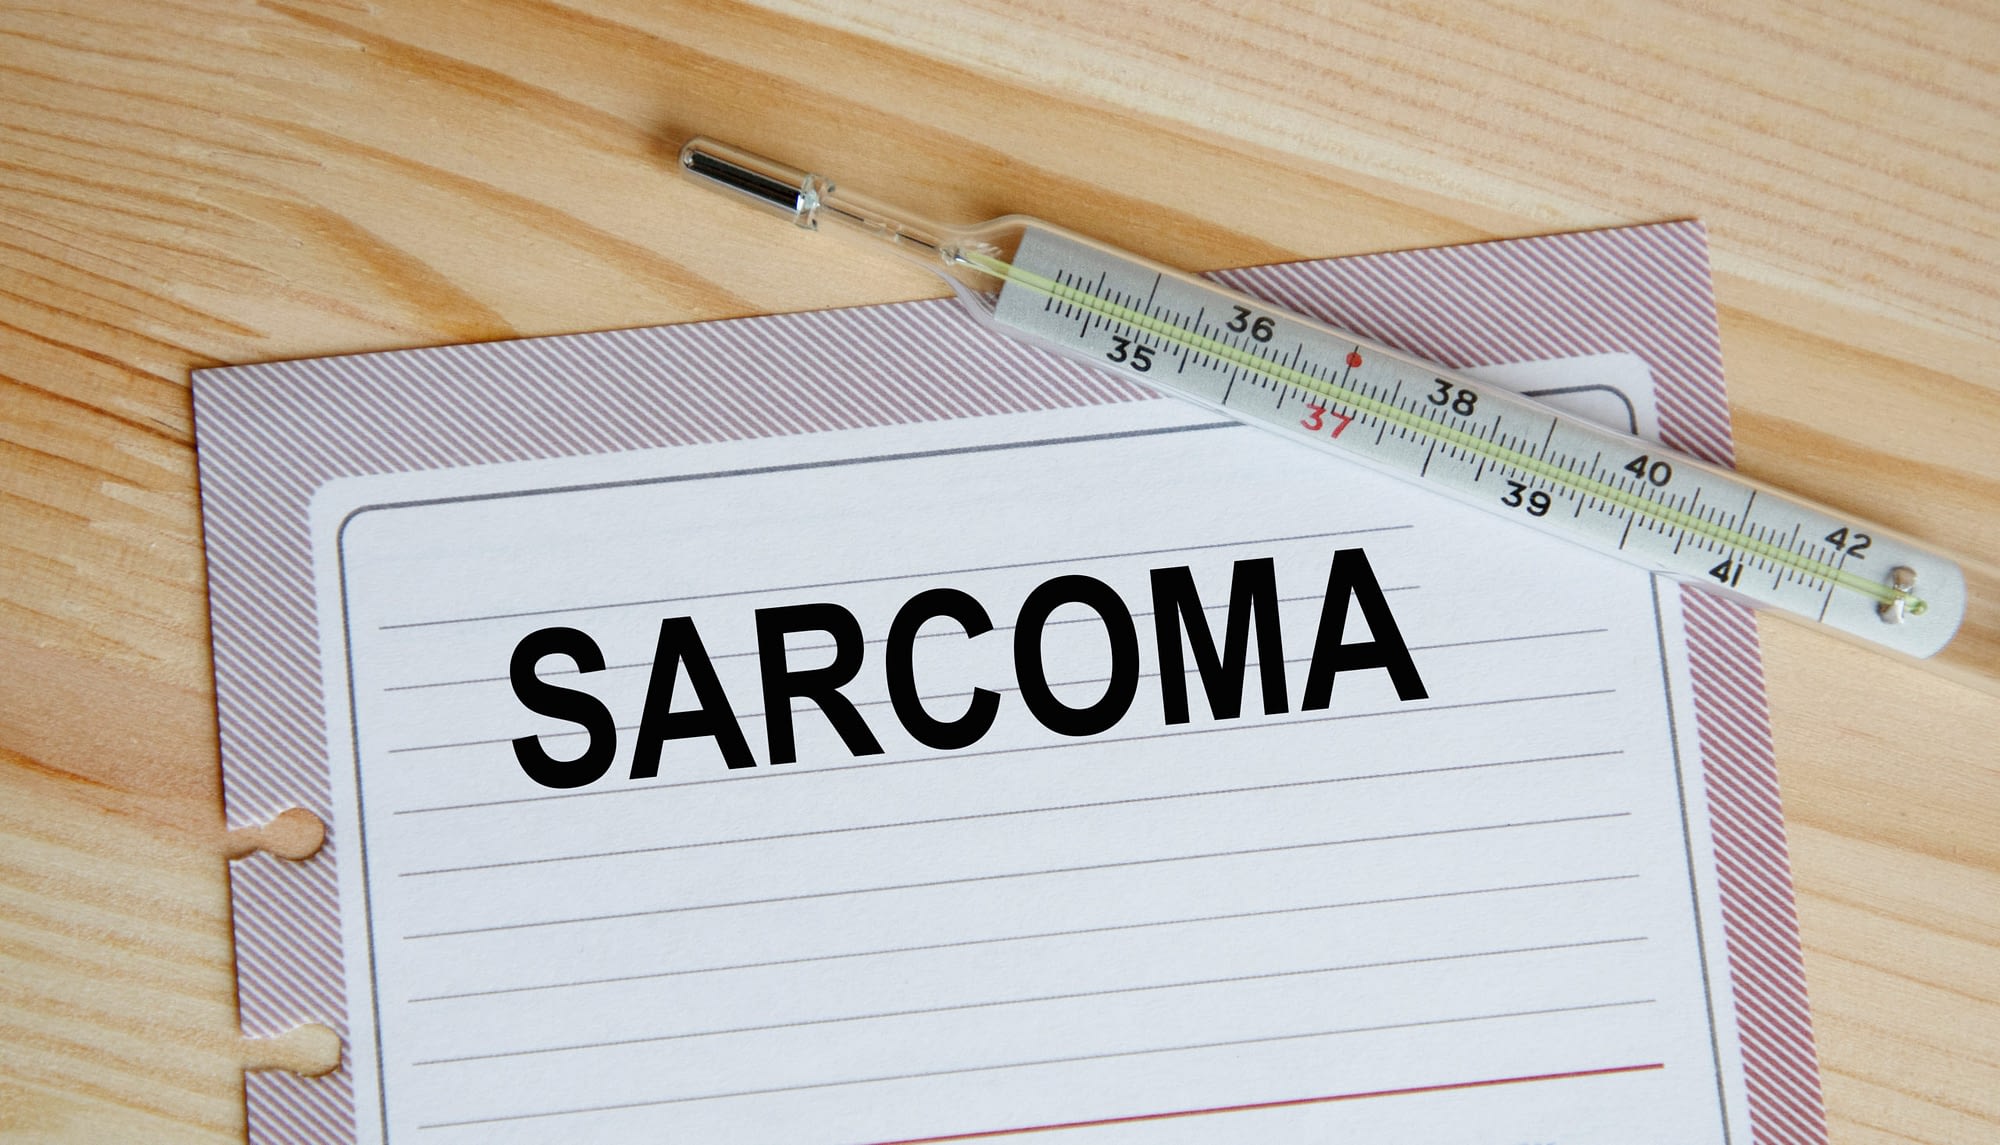 On the sheet is the inscription SARCOMA, next to the thermometer, against the background of a wooden table. A medical concept.